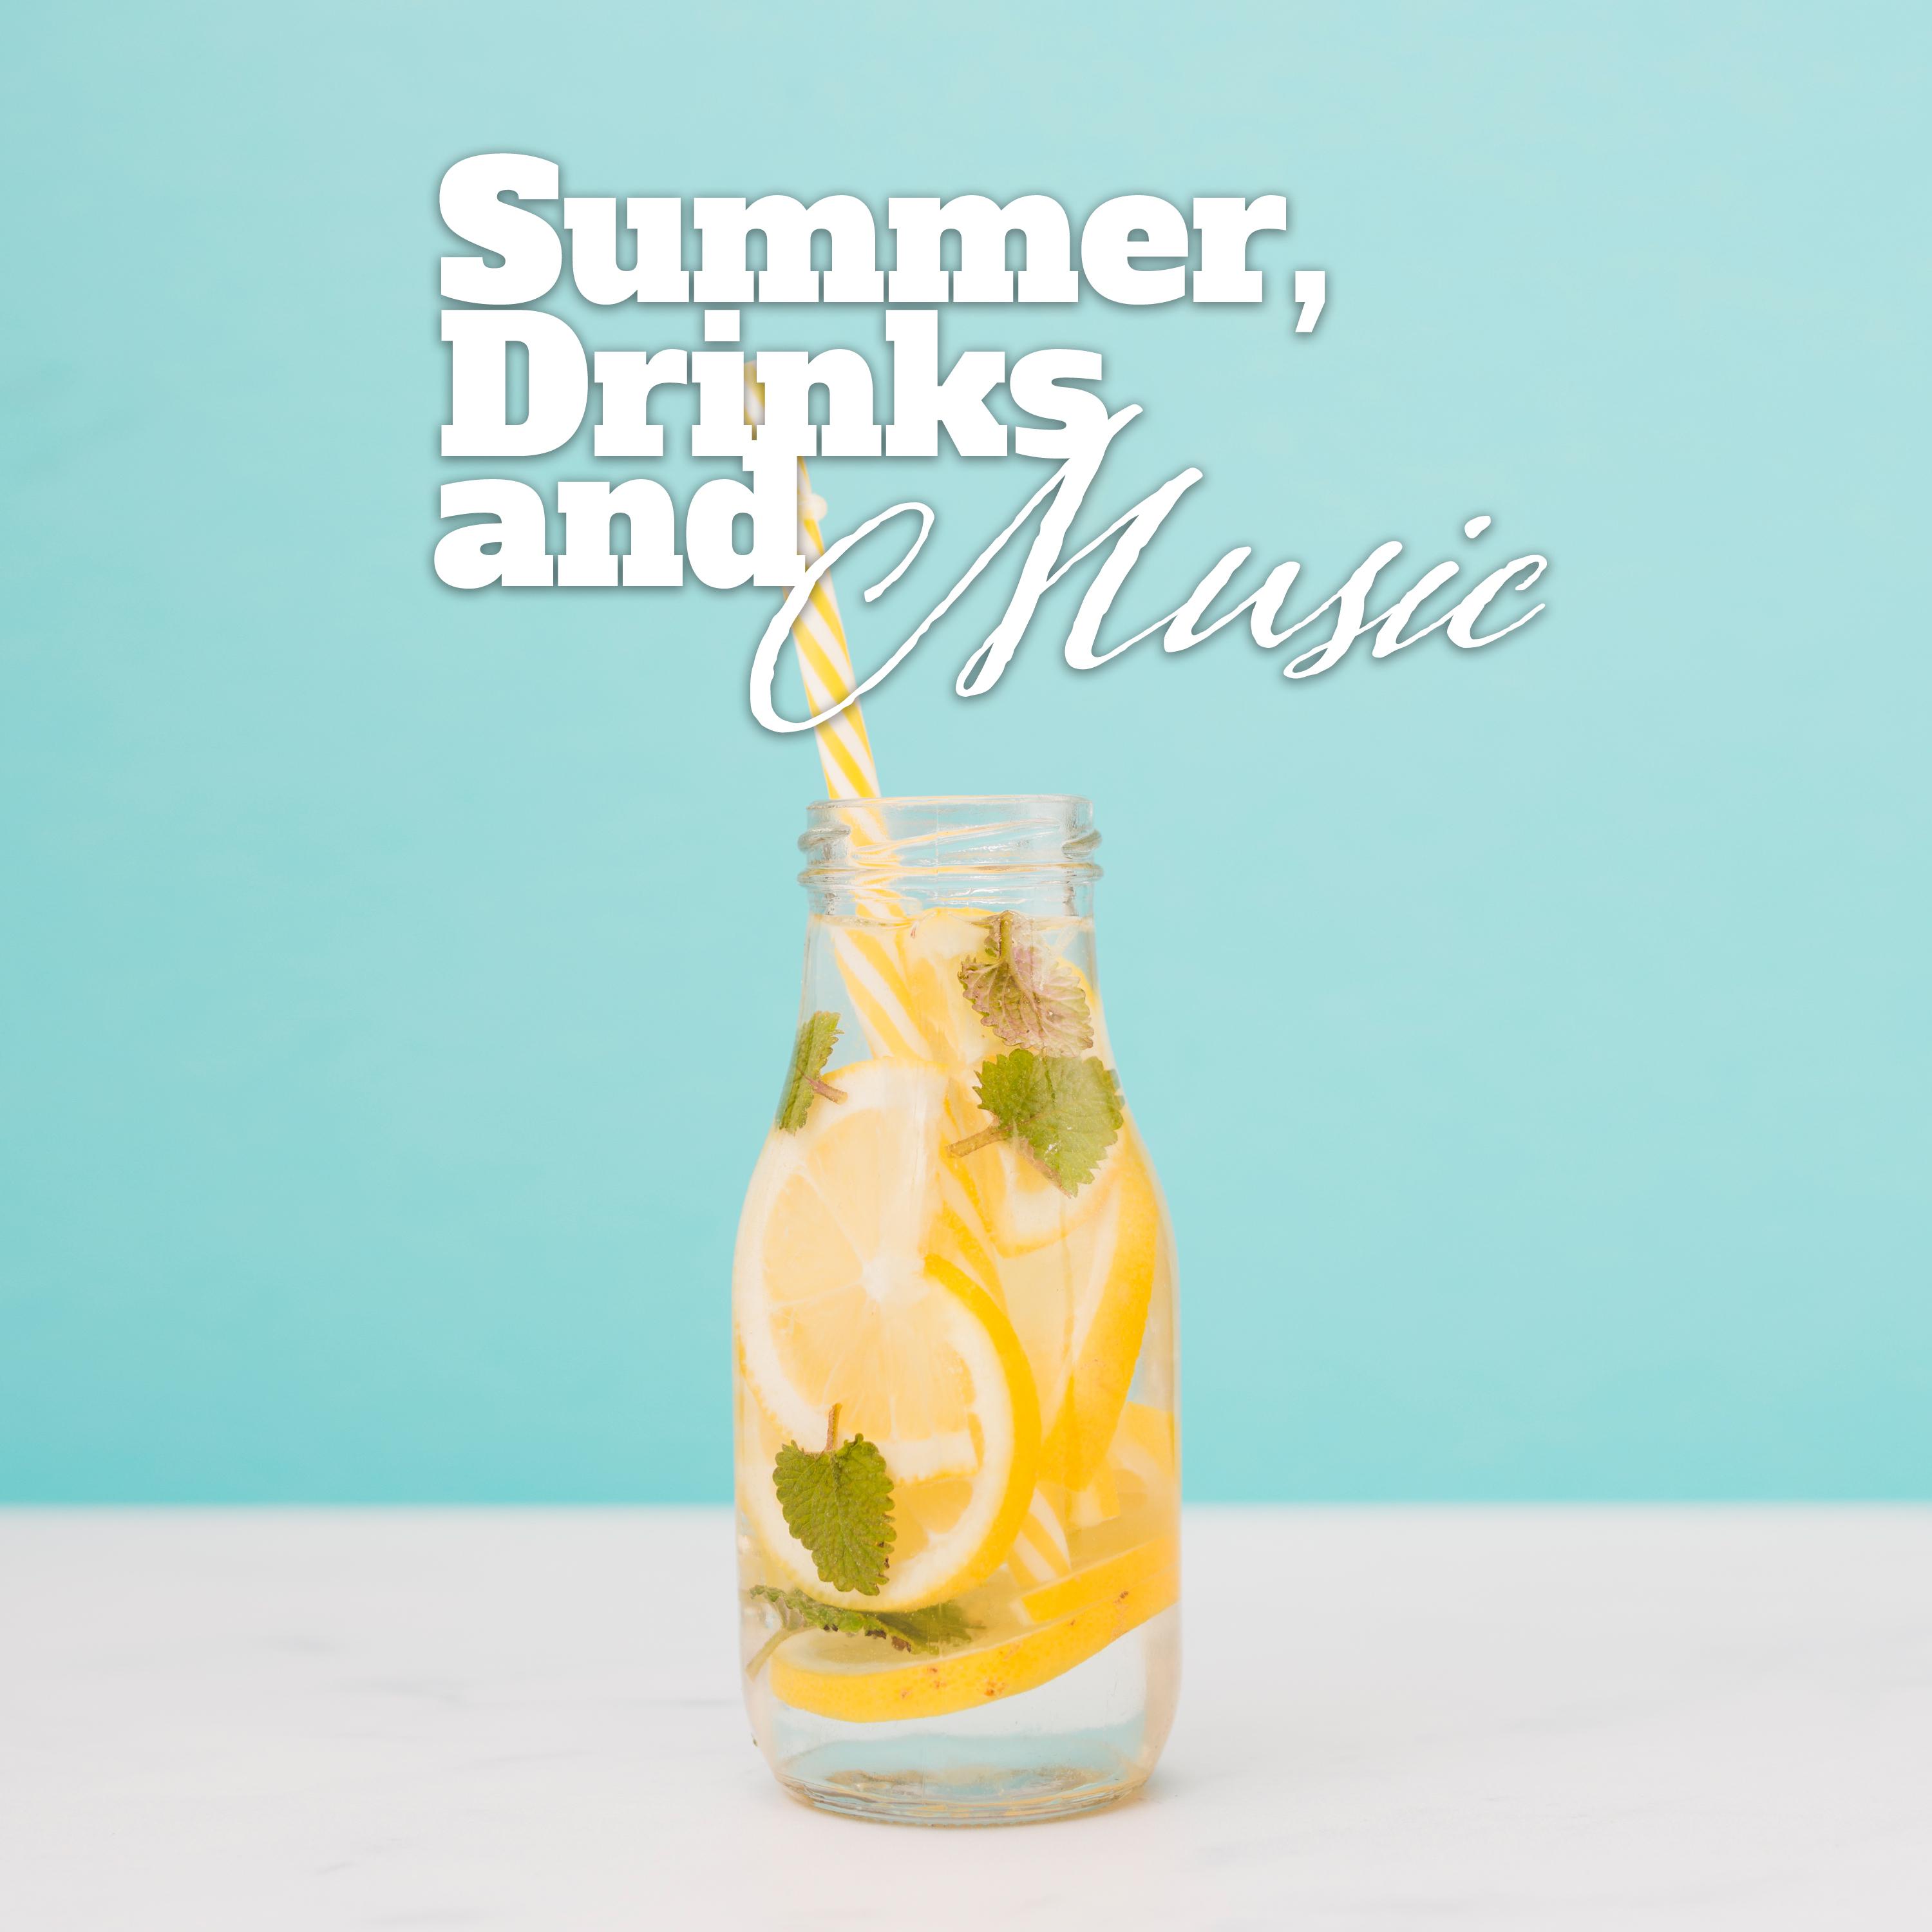 Summer, Drinks and Music - Best Holiday Set for Summer Rest and Long-Awaited Relaxation